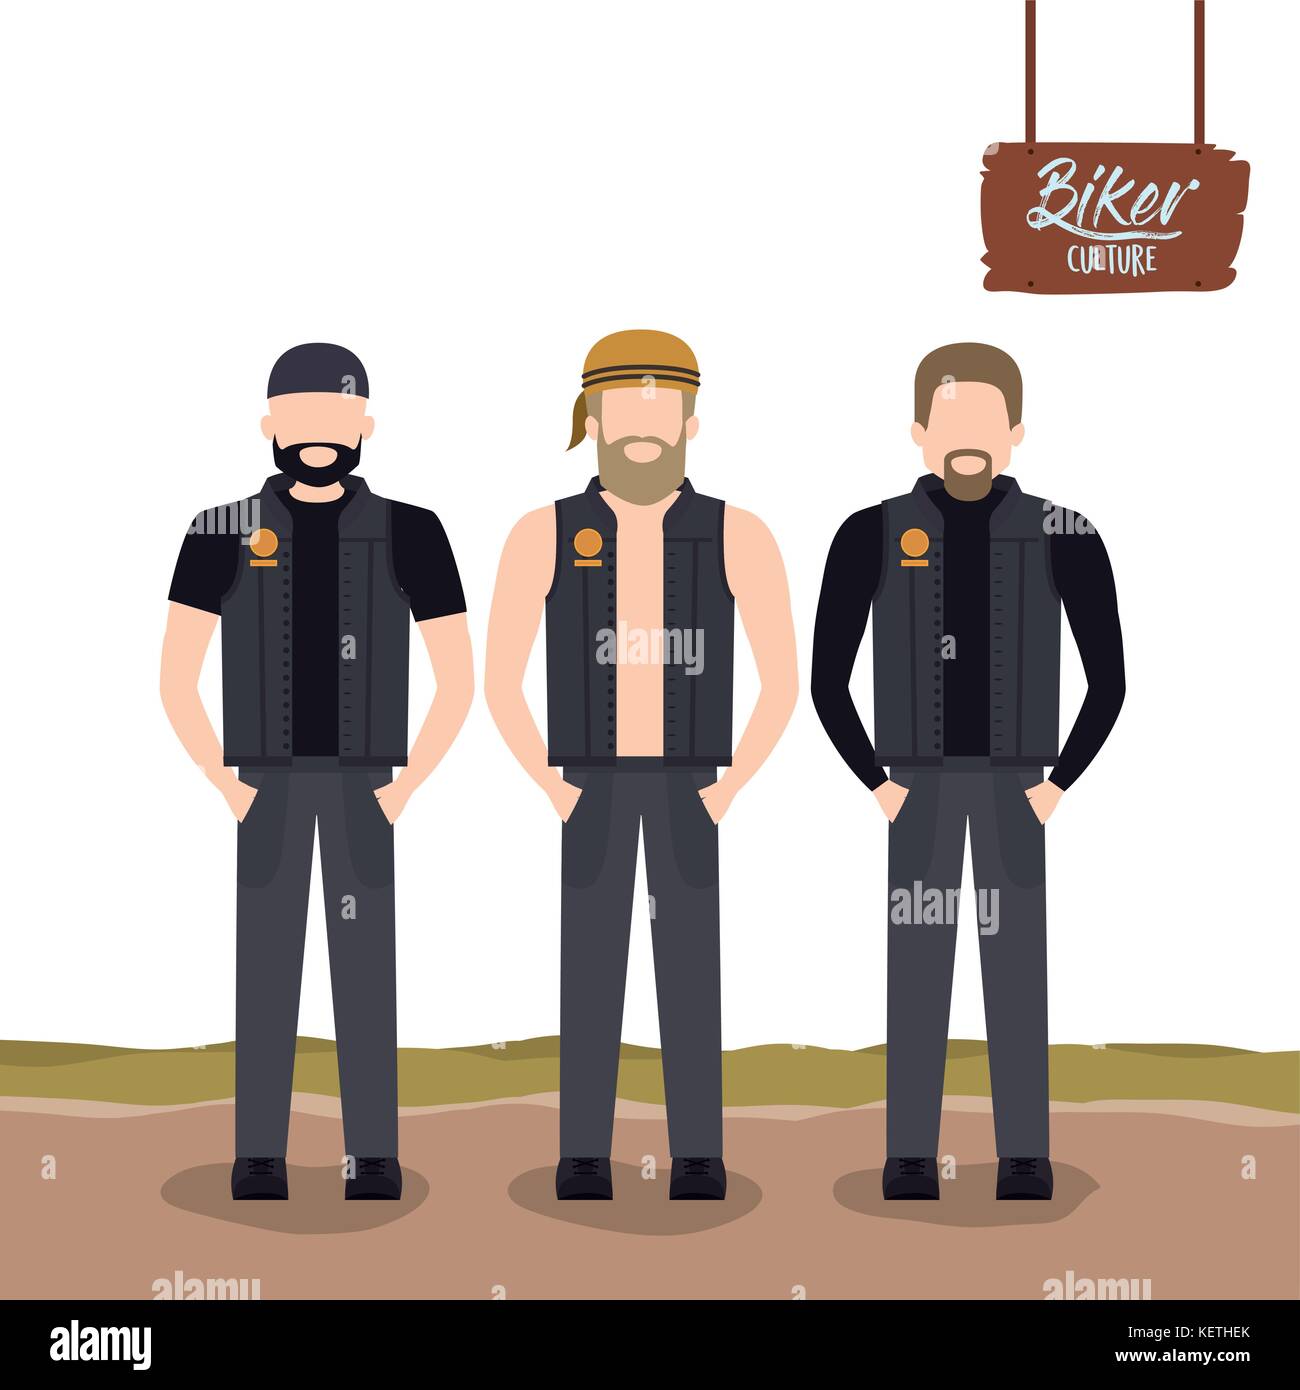 biker culture poster with standing men motorcyclists with beards and leather jackets Stock Vector